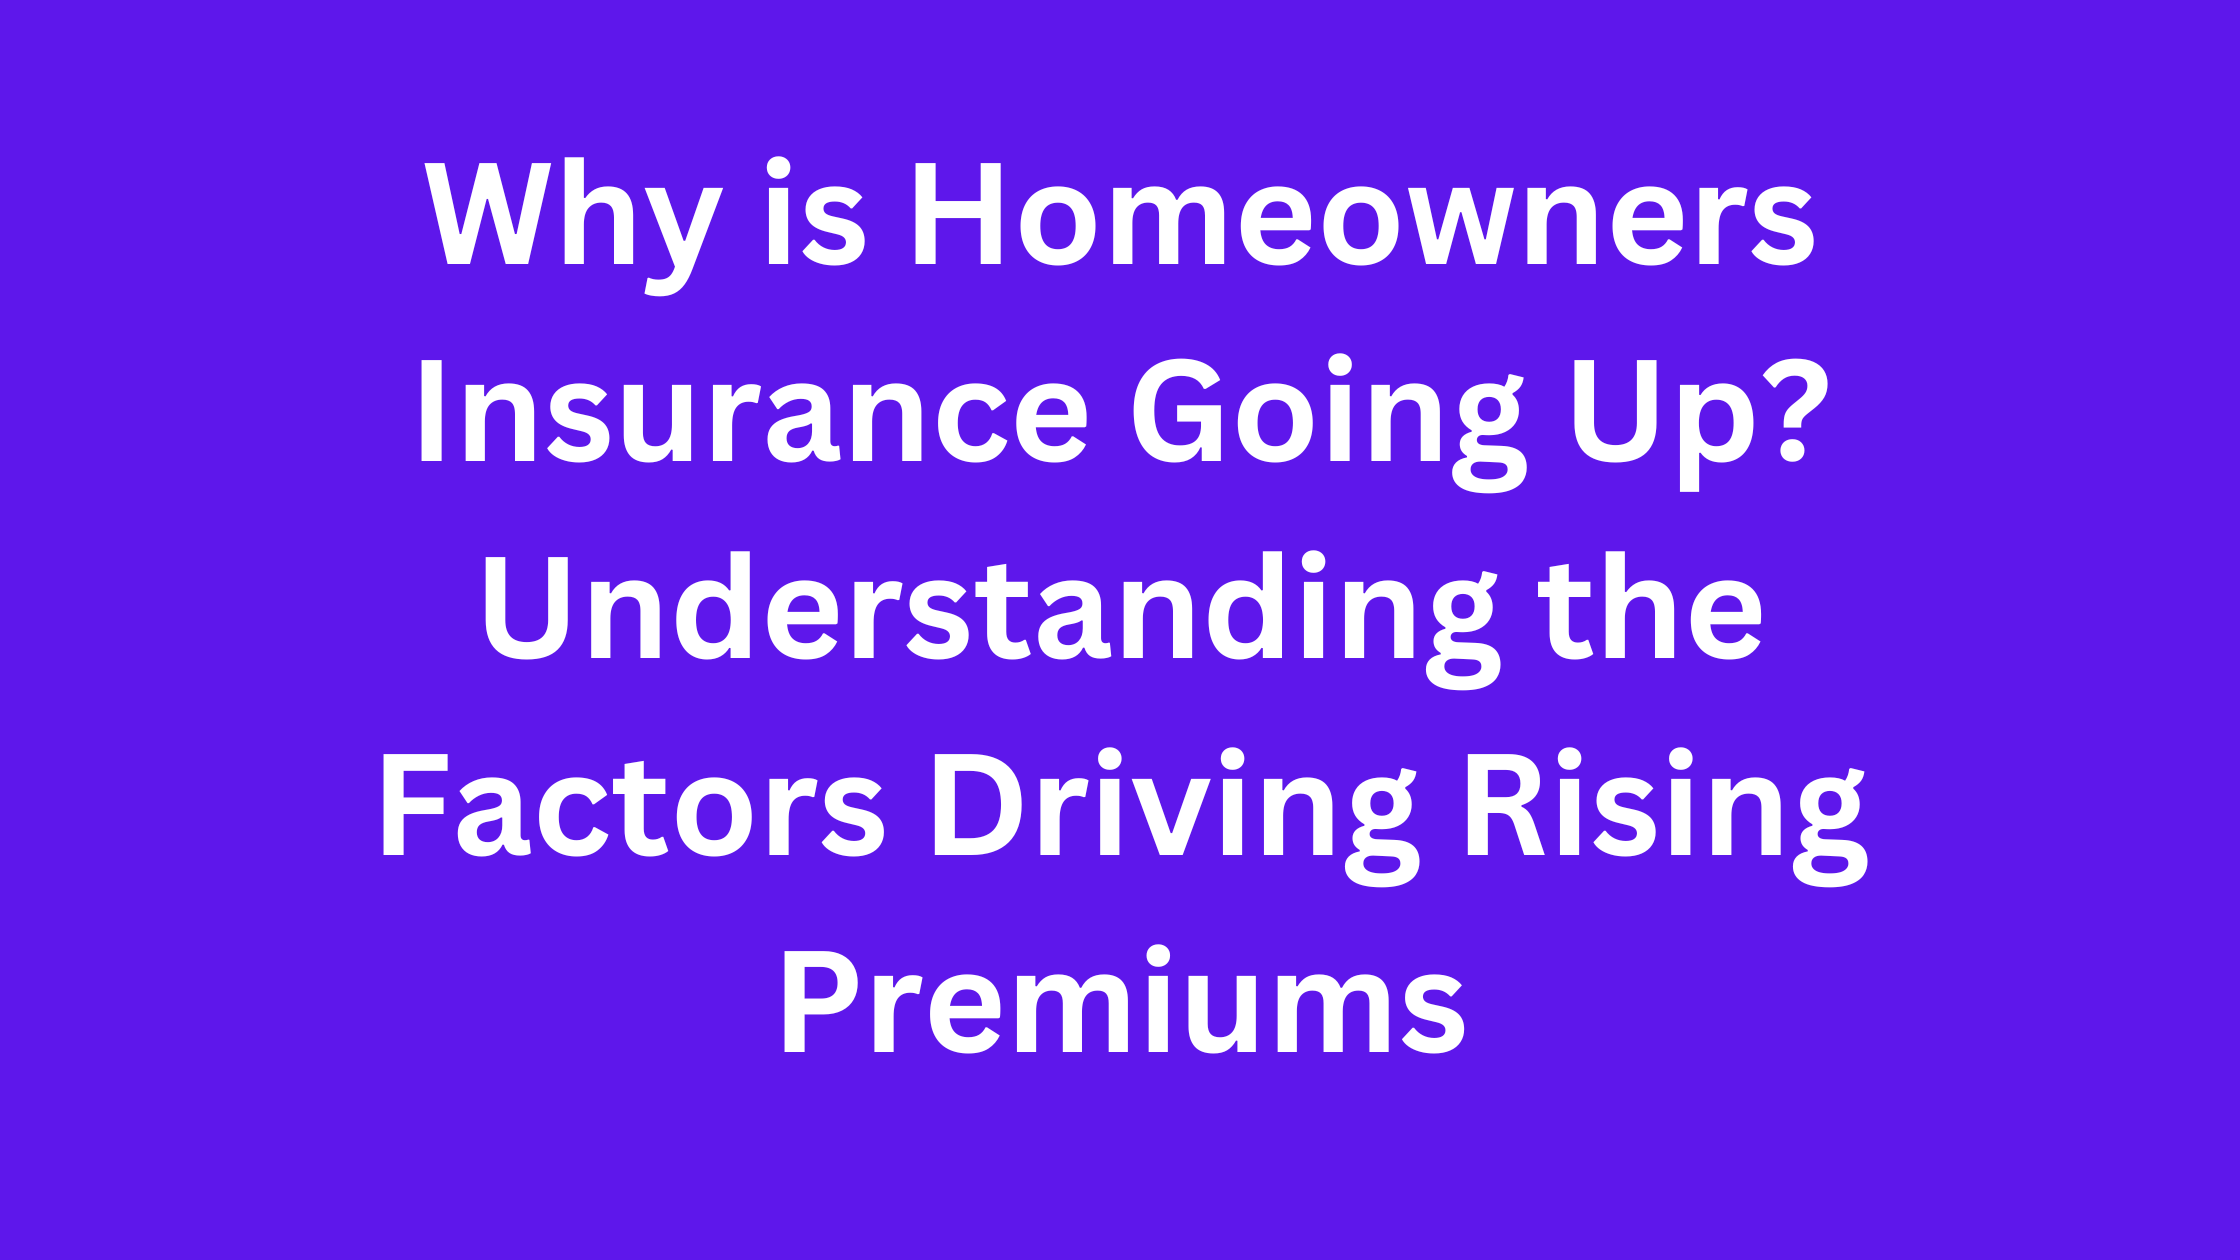 Why is Homeowners Insurance Going Up? Understanding the Factors Driving Rising Premiums